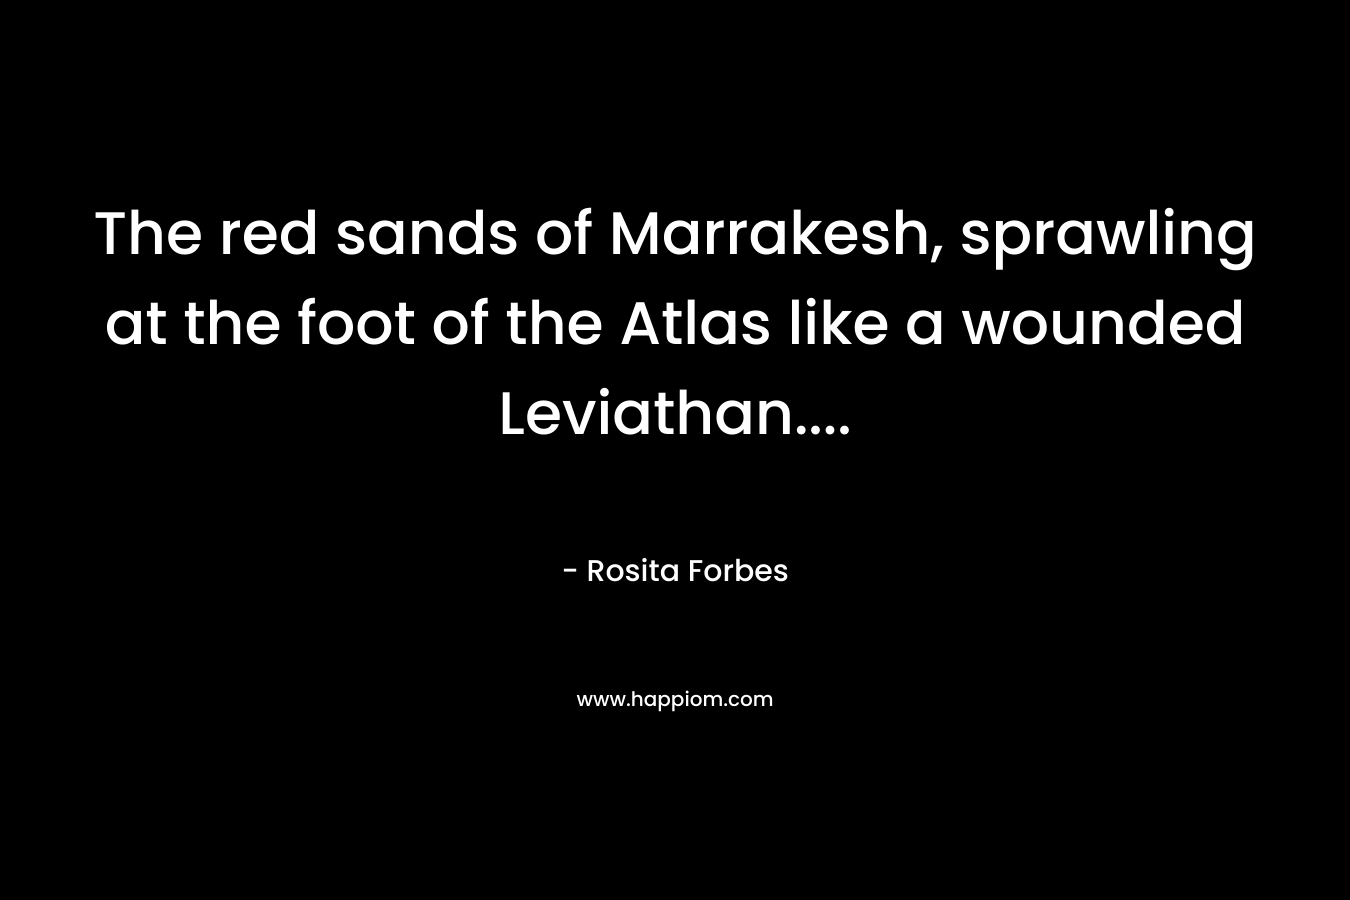 The red sands of Marrakesh, sprawling at the foot of the Atlas like a wounded Leviathan…. – Rosita Forbes